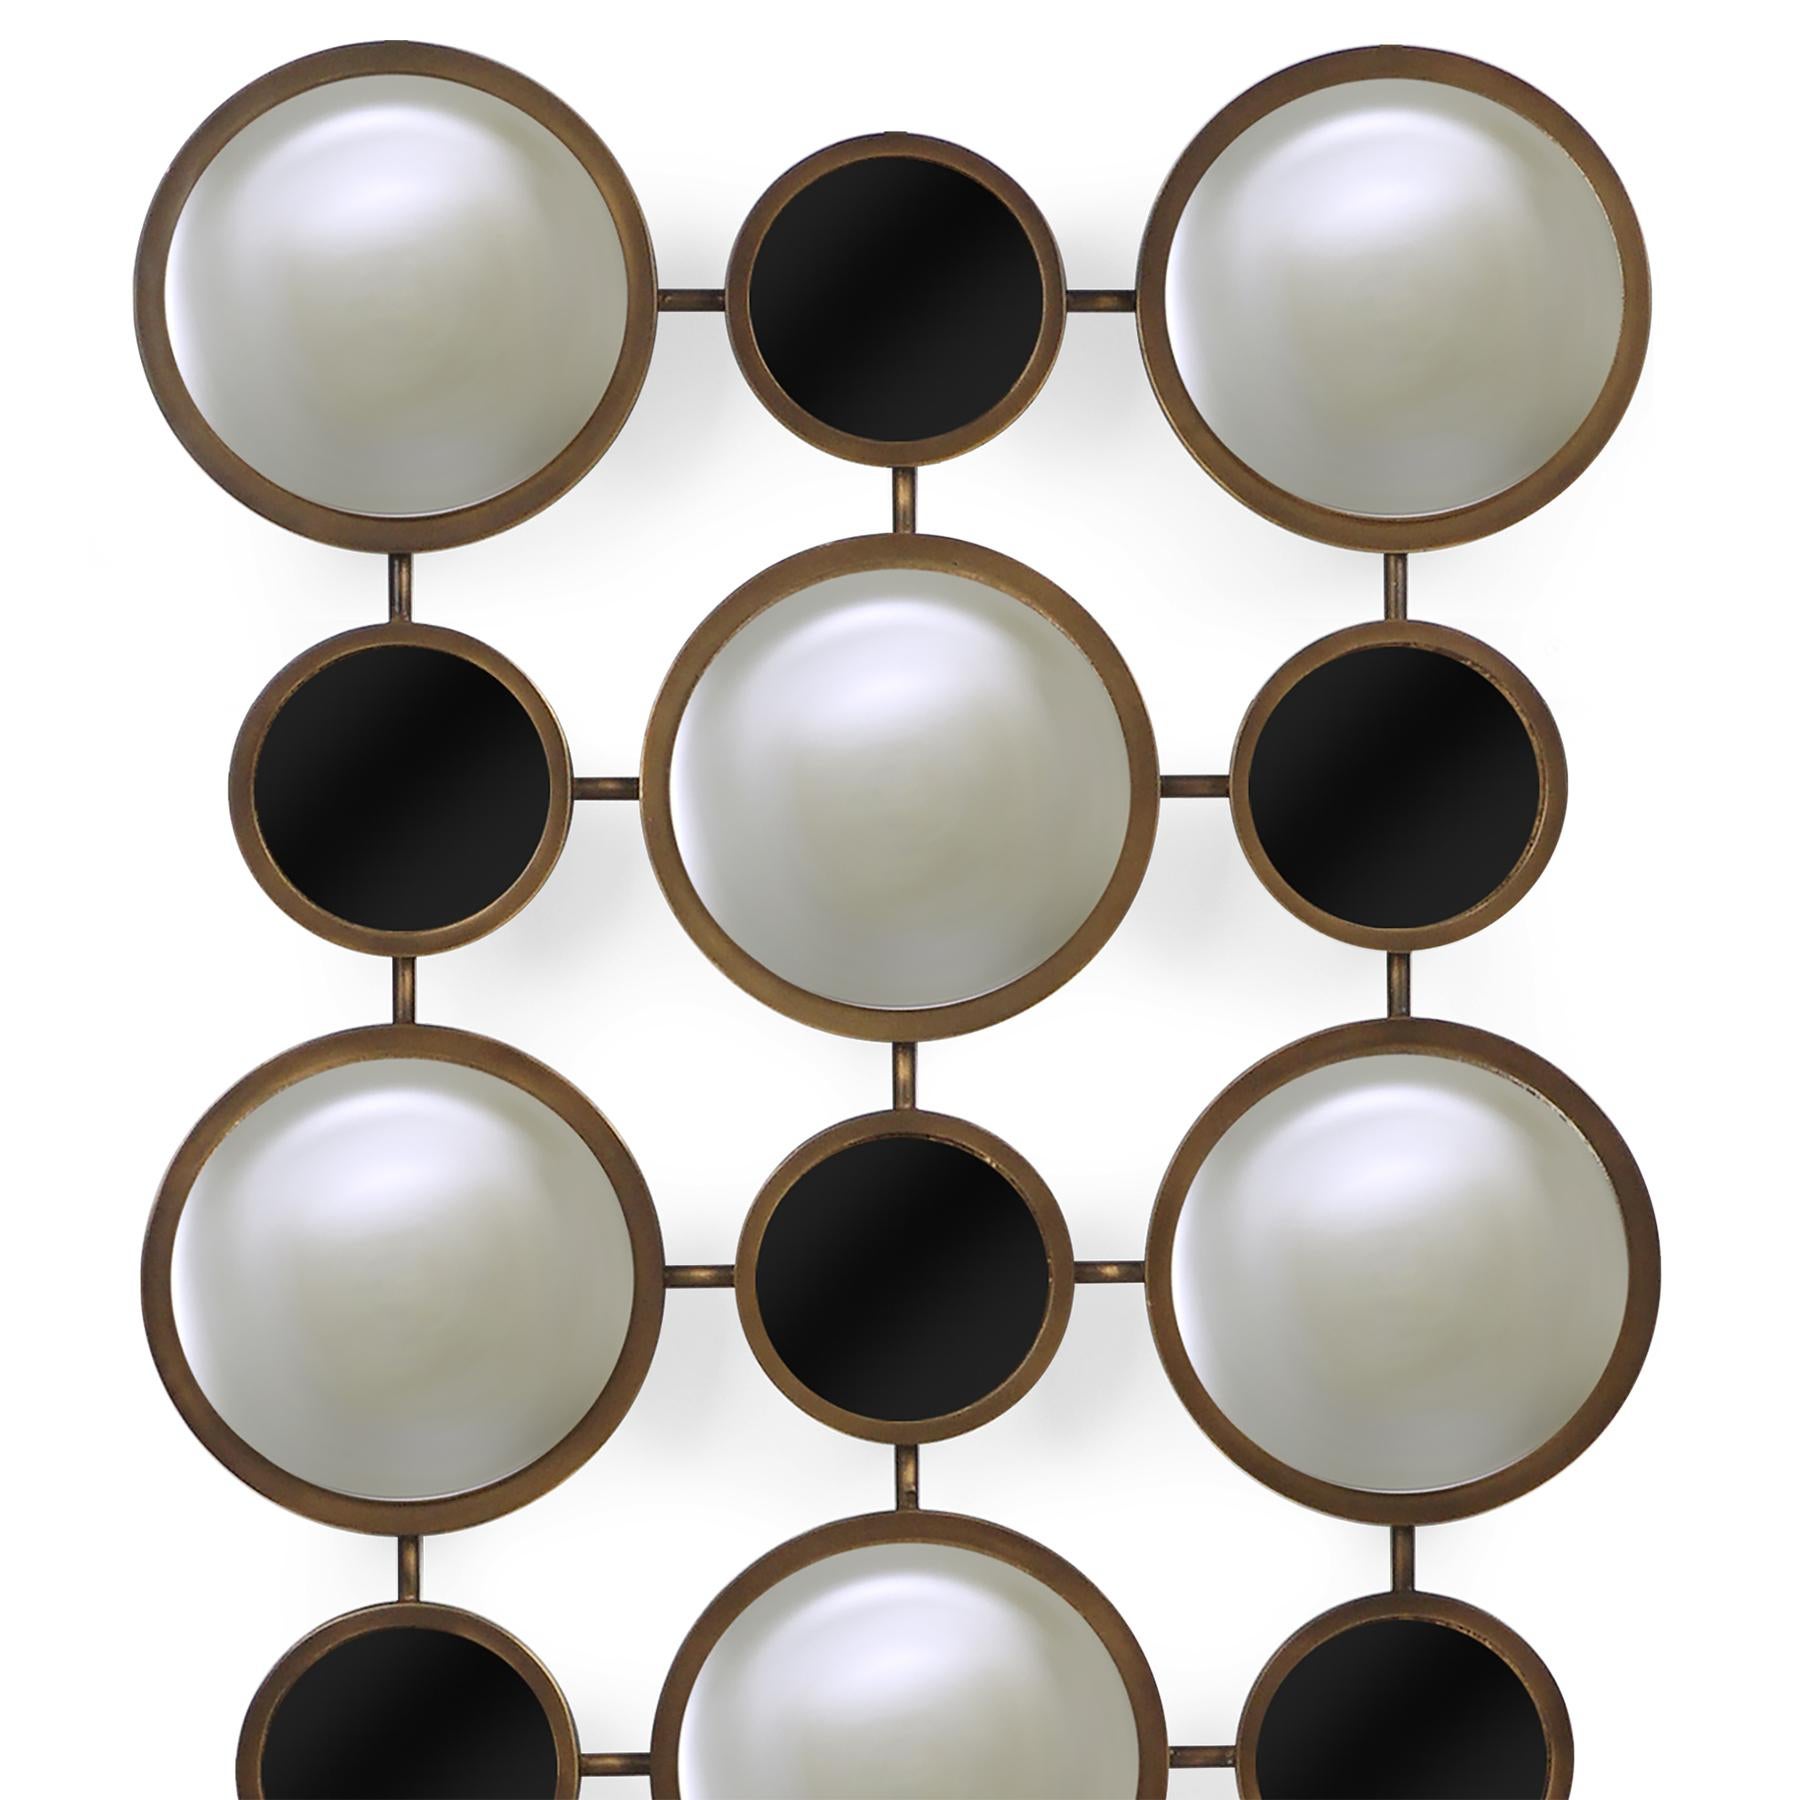 Mirror rings convex with metal frame in
bronzage finish and with 8 convex mirrors.
With 7 round black glass rounds.
Also available with frame in gold leaf or
silver leaf finish.